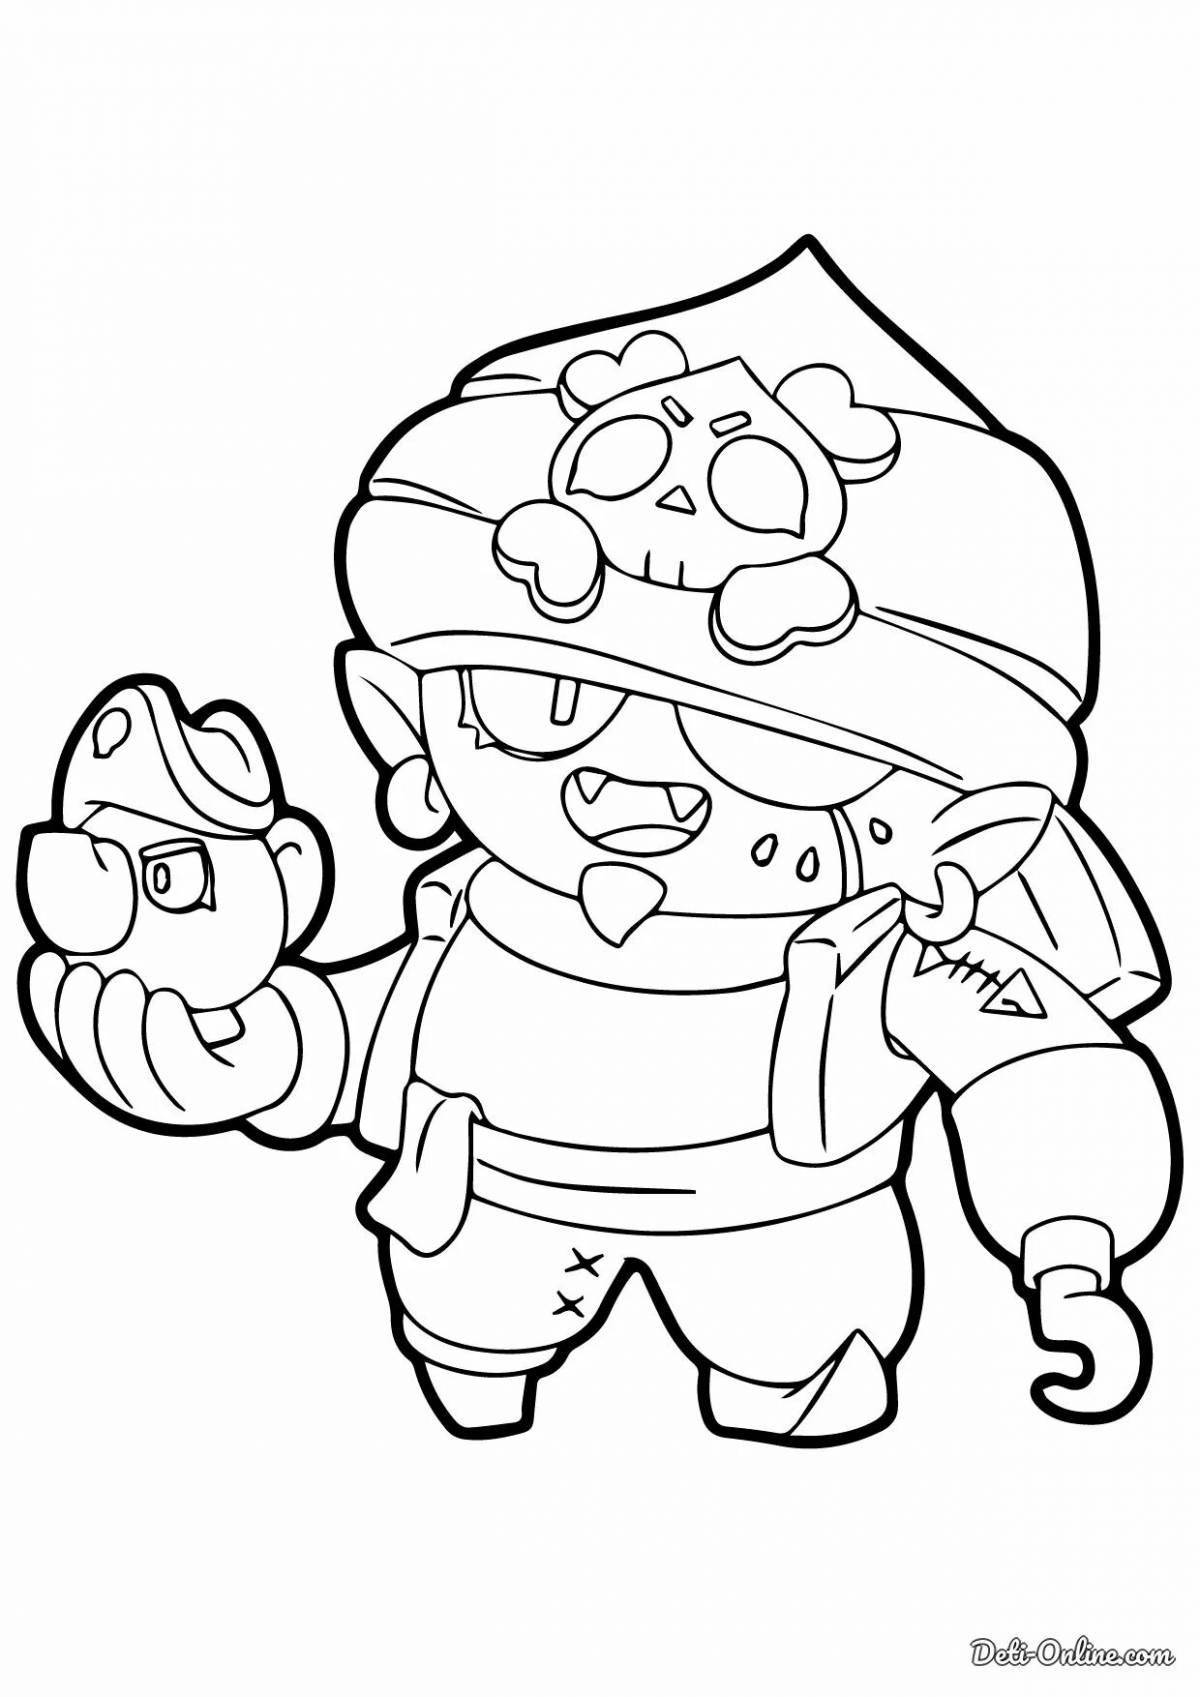 Impressive coloring pages brawl stars all brawlers